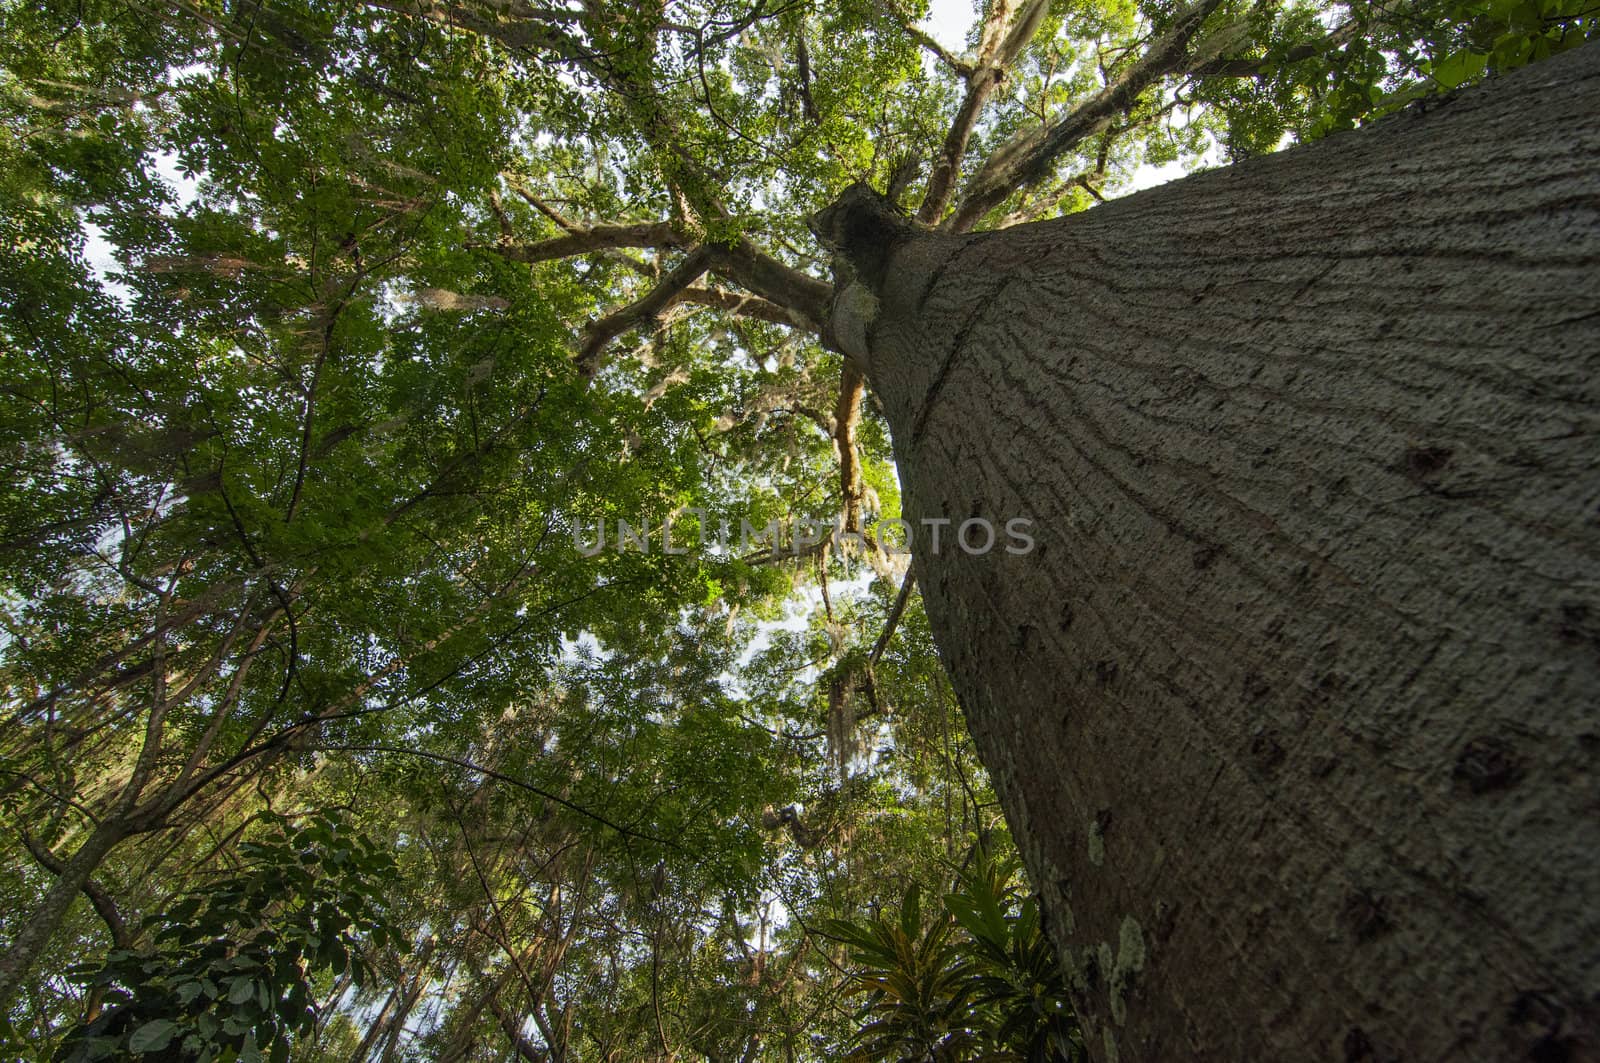 A view looking up at a Ceiba tree in San Gil, Colombia.